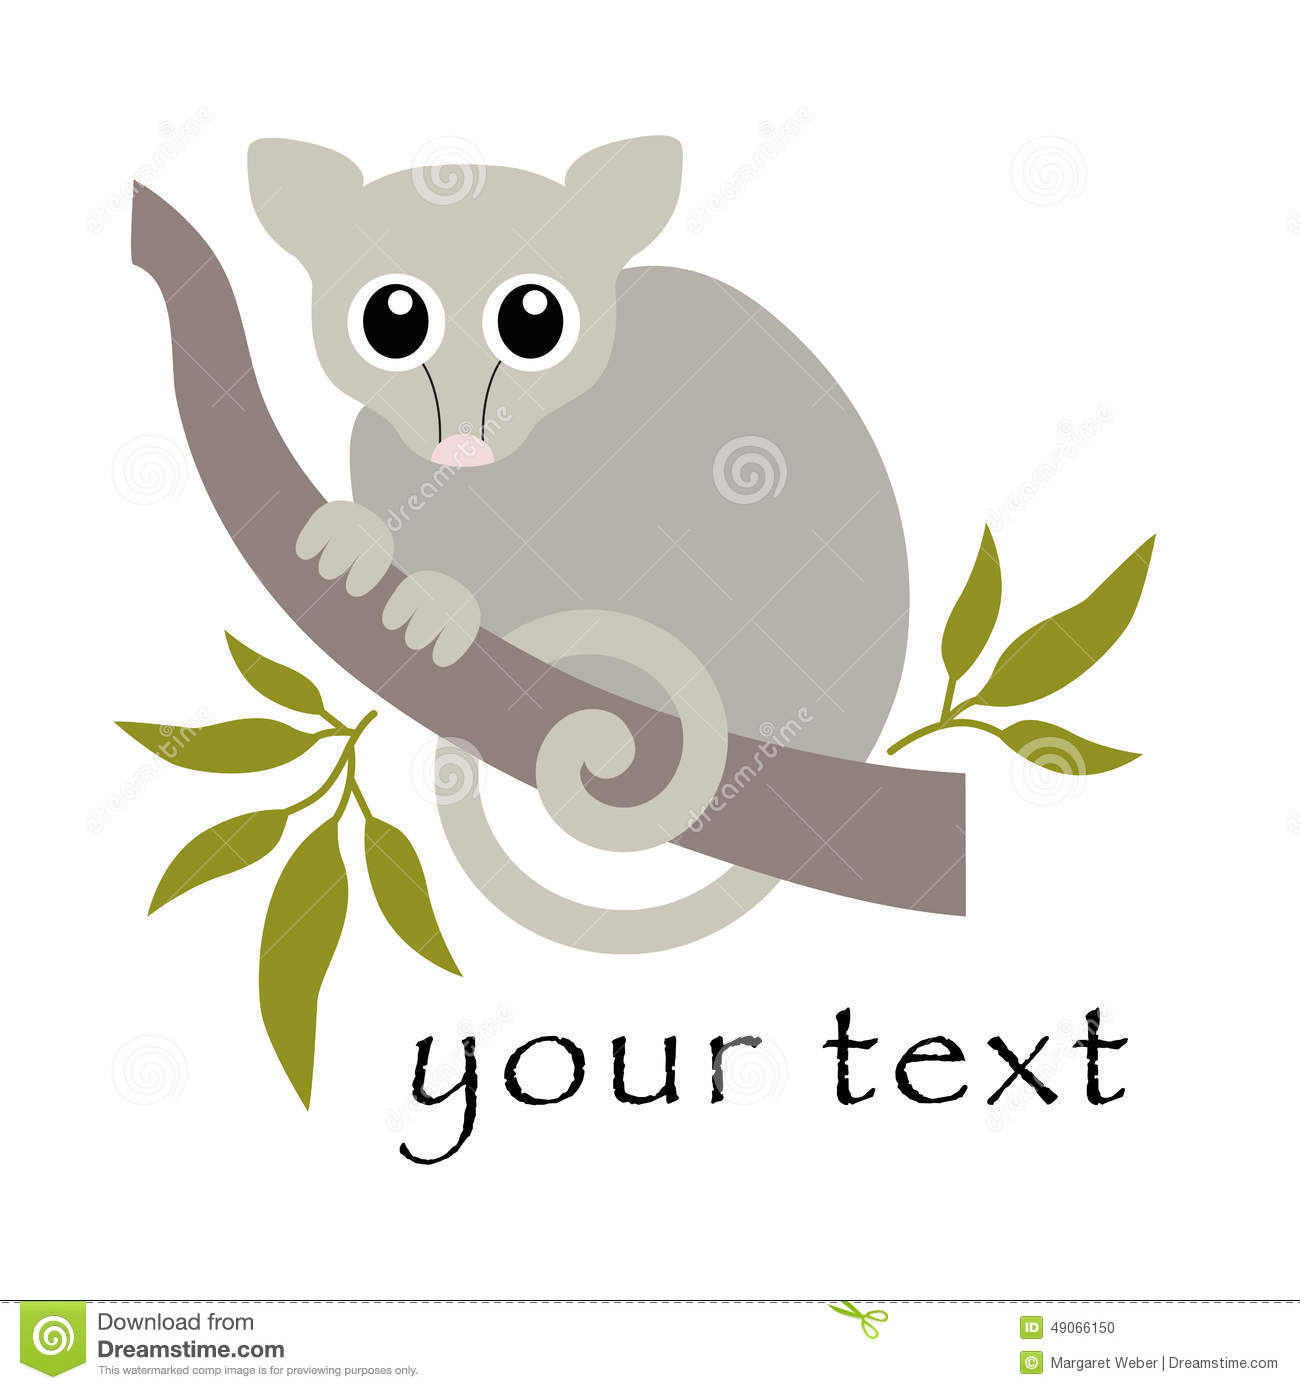 Brushtail Possum clipart #13, Download drawings